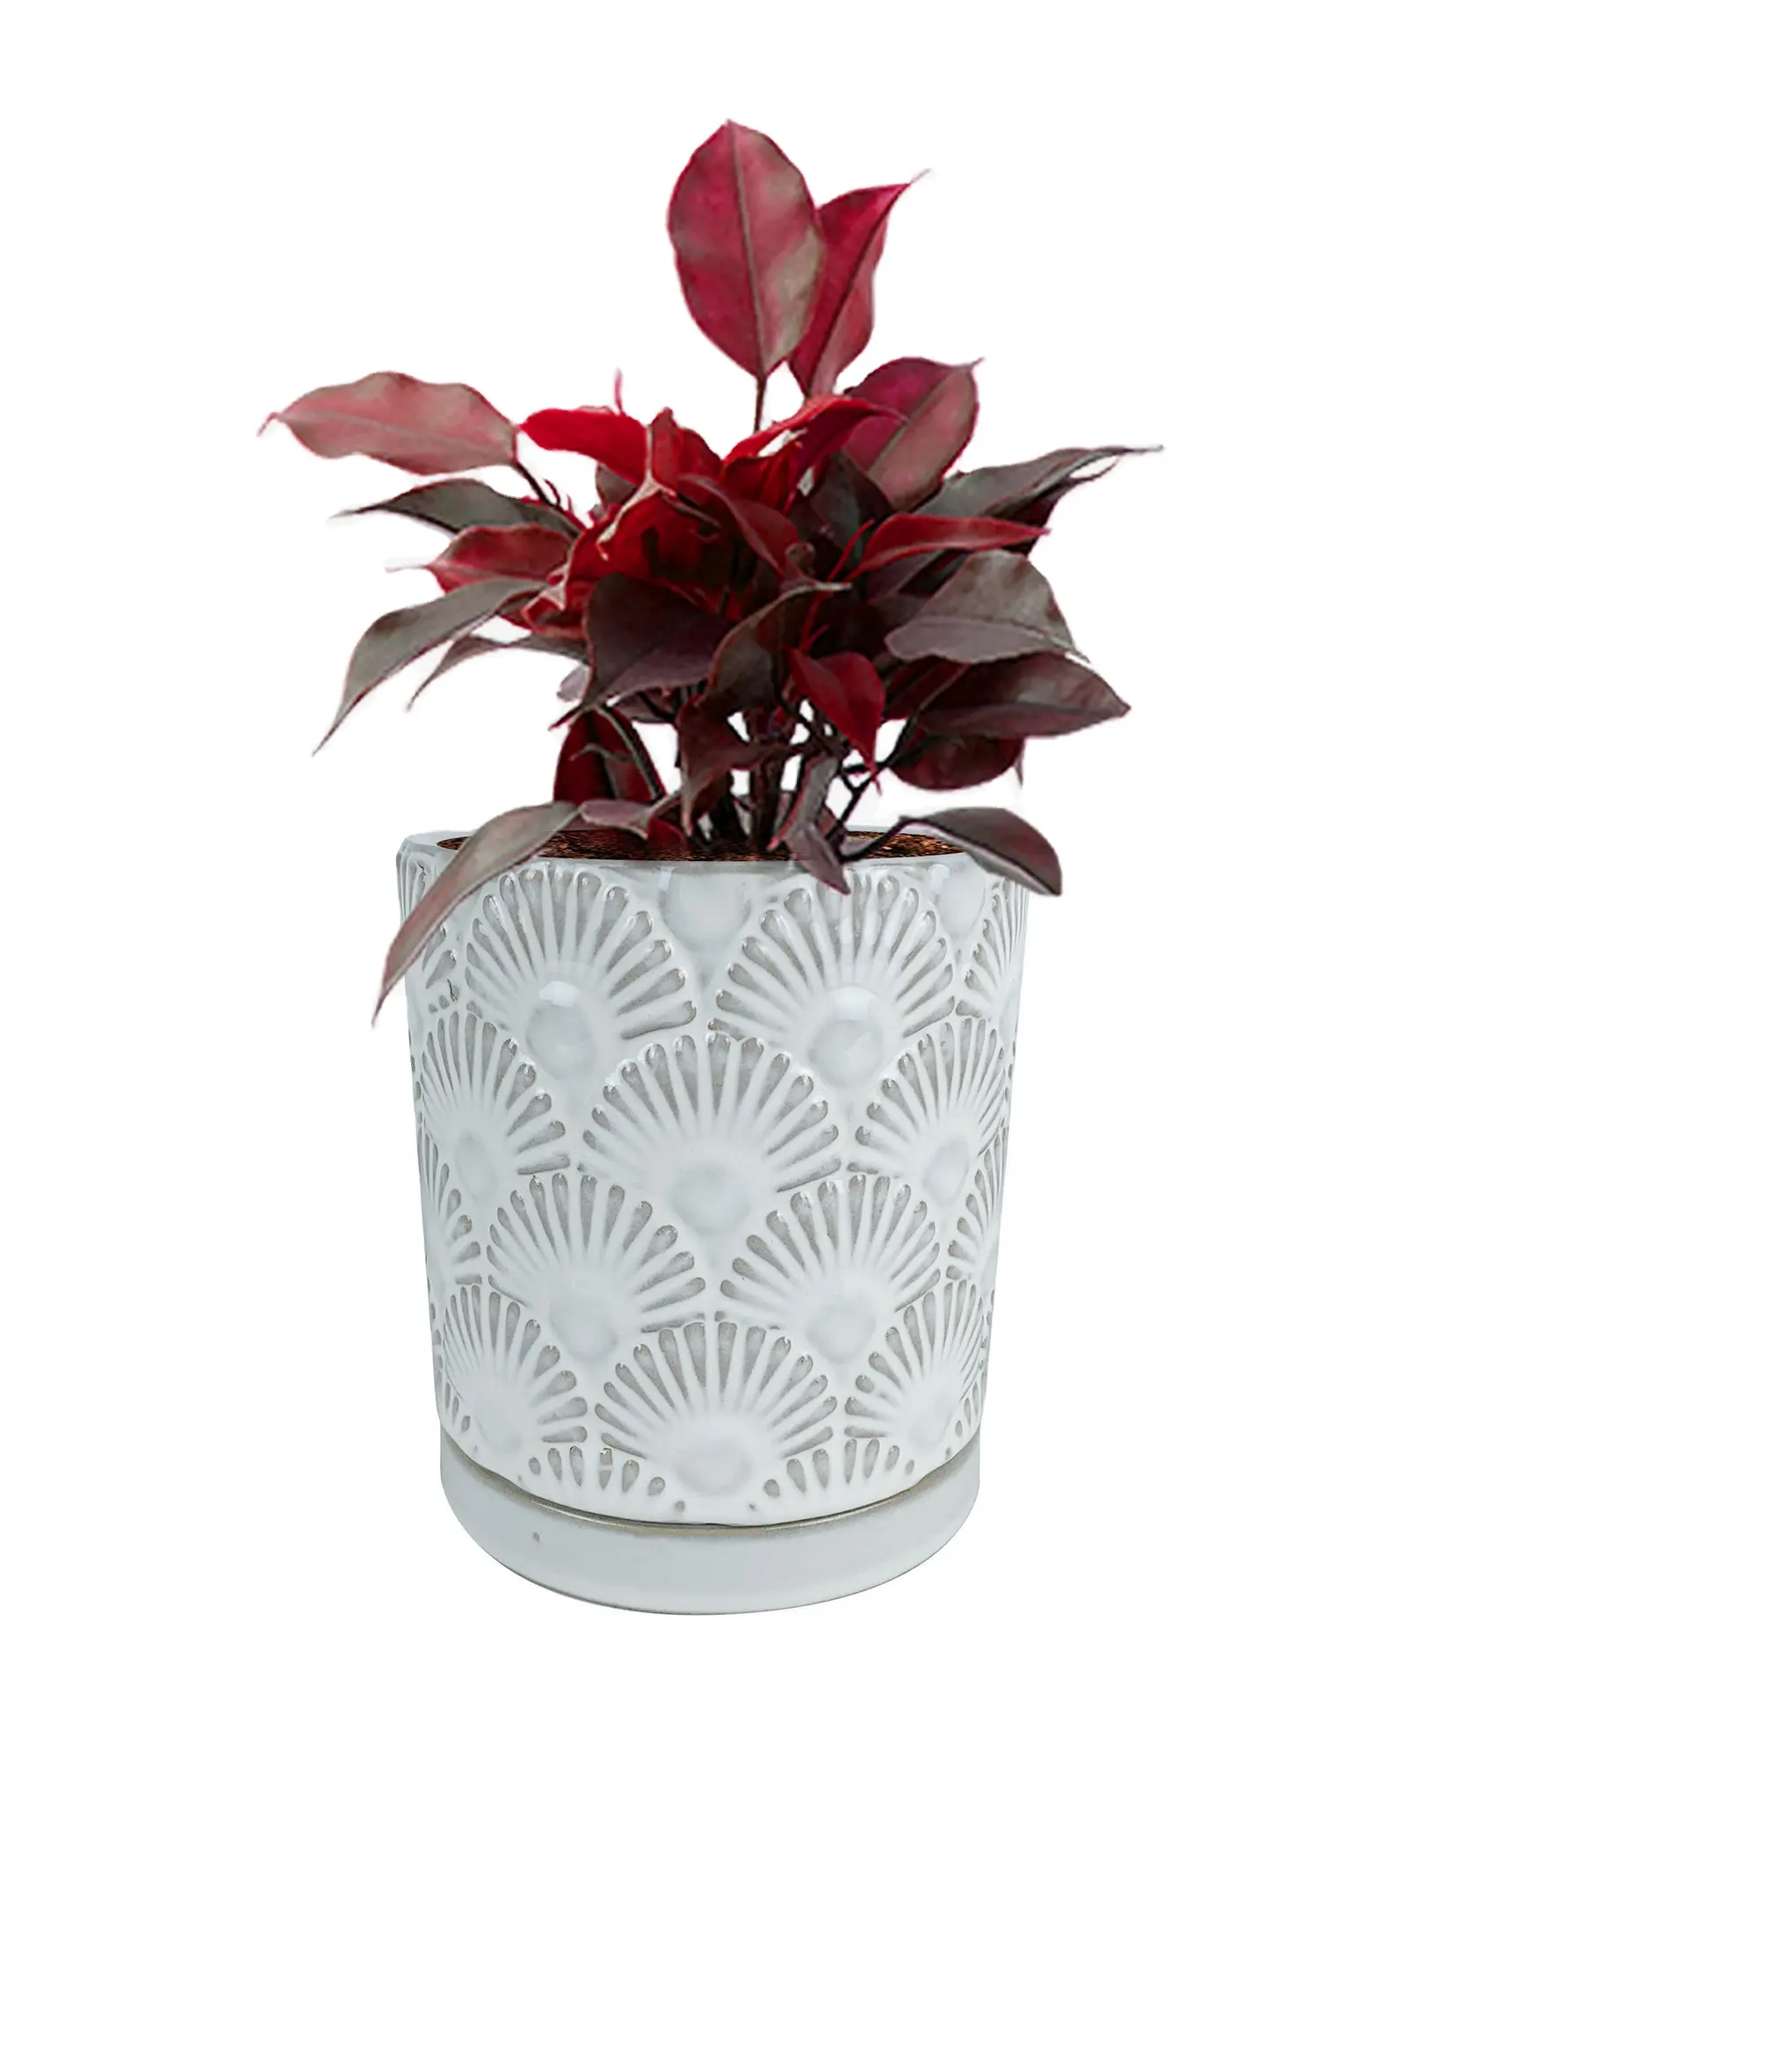 New Design Ceramic Flower Pot with Plate Solid Glazed Bonsai with Exquisite Fan Embossed Modern Home Decor